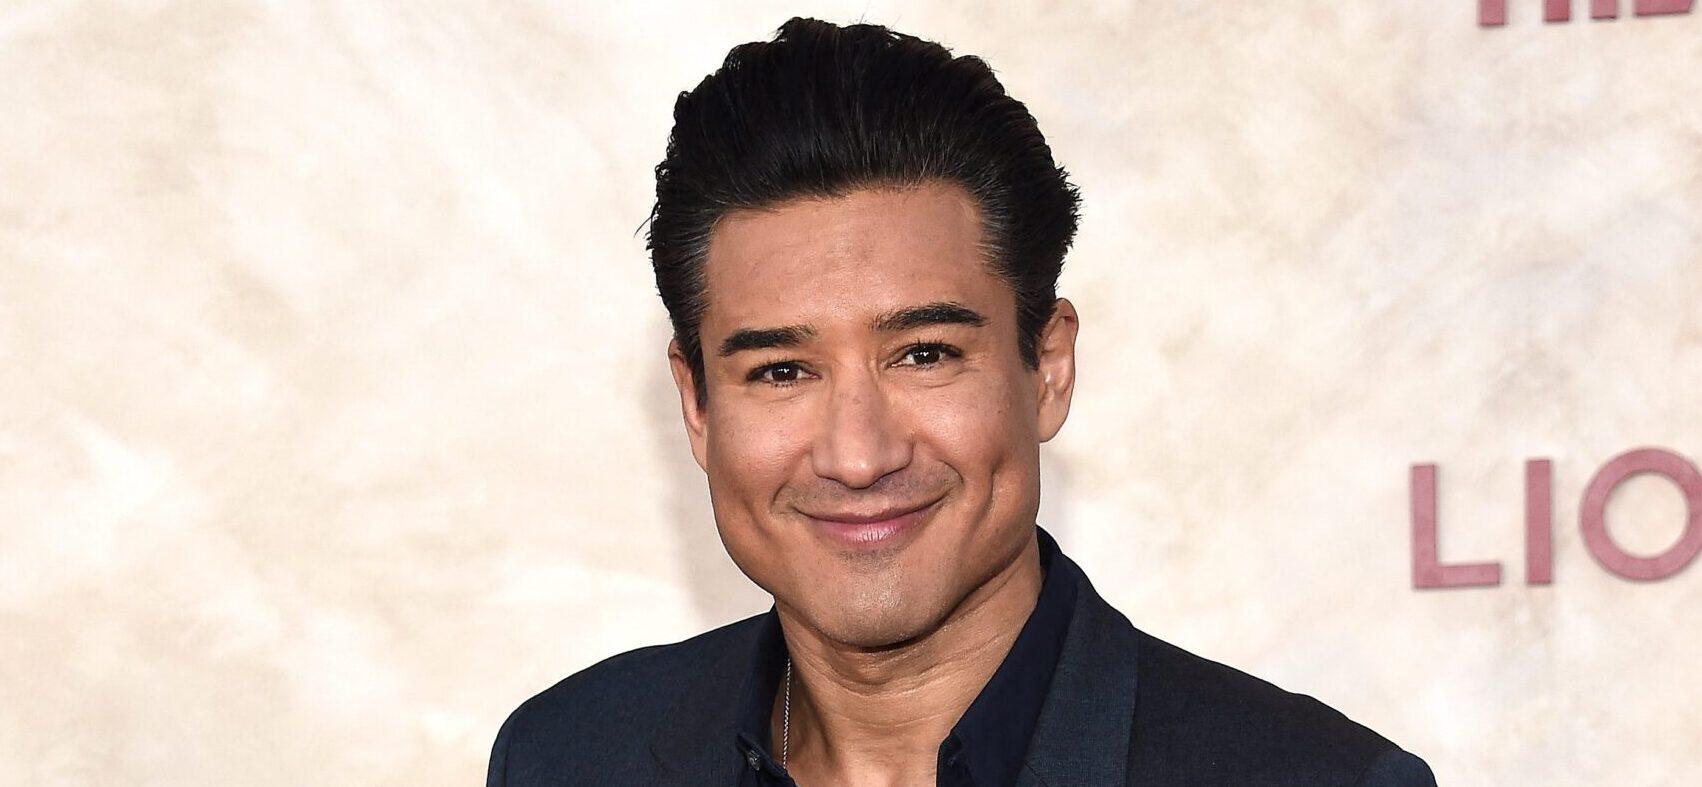 Mario Lopez Shows Up To Work Despite ‘Busted’ Face